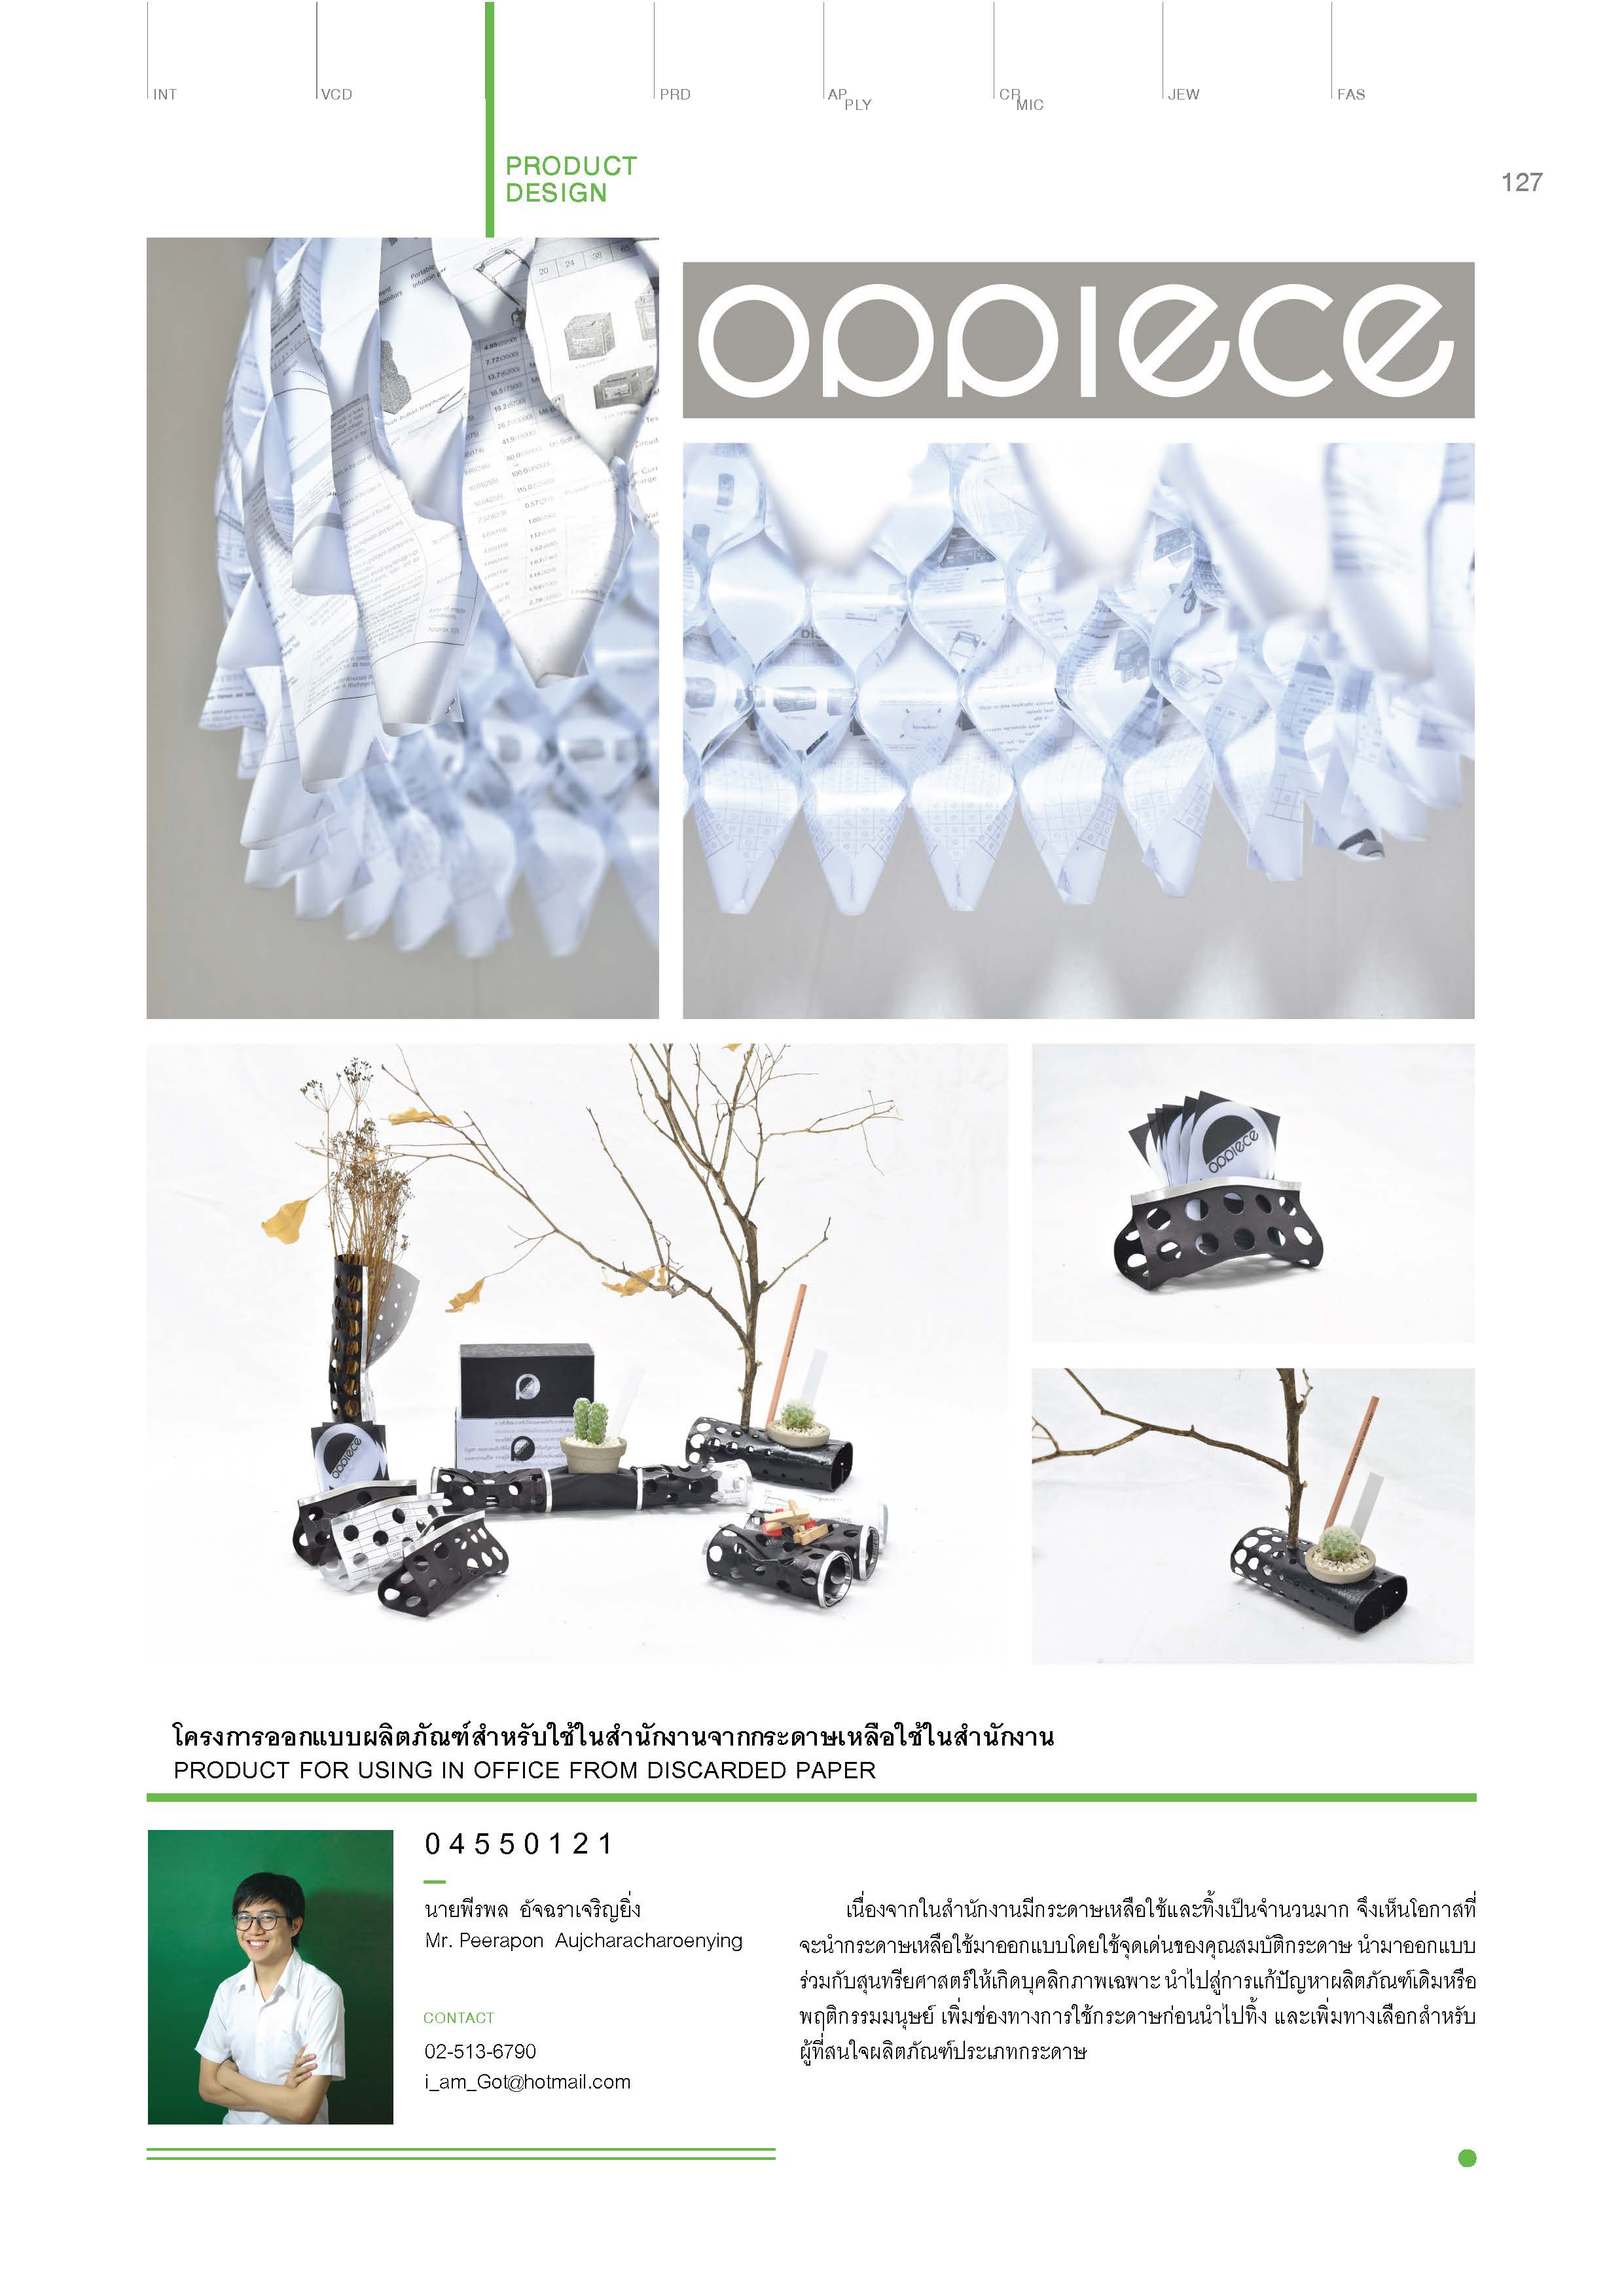 Photosynthesis-The46th_Art_Thesis_Exhibition_Decorative_Arts_Page_147